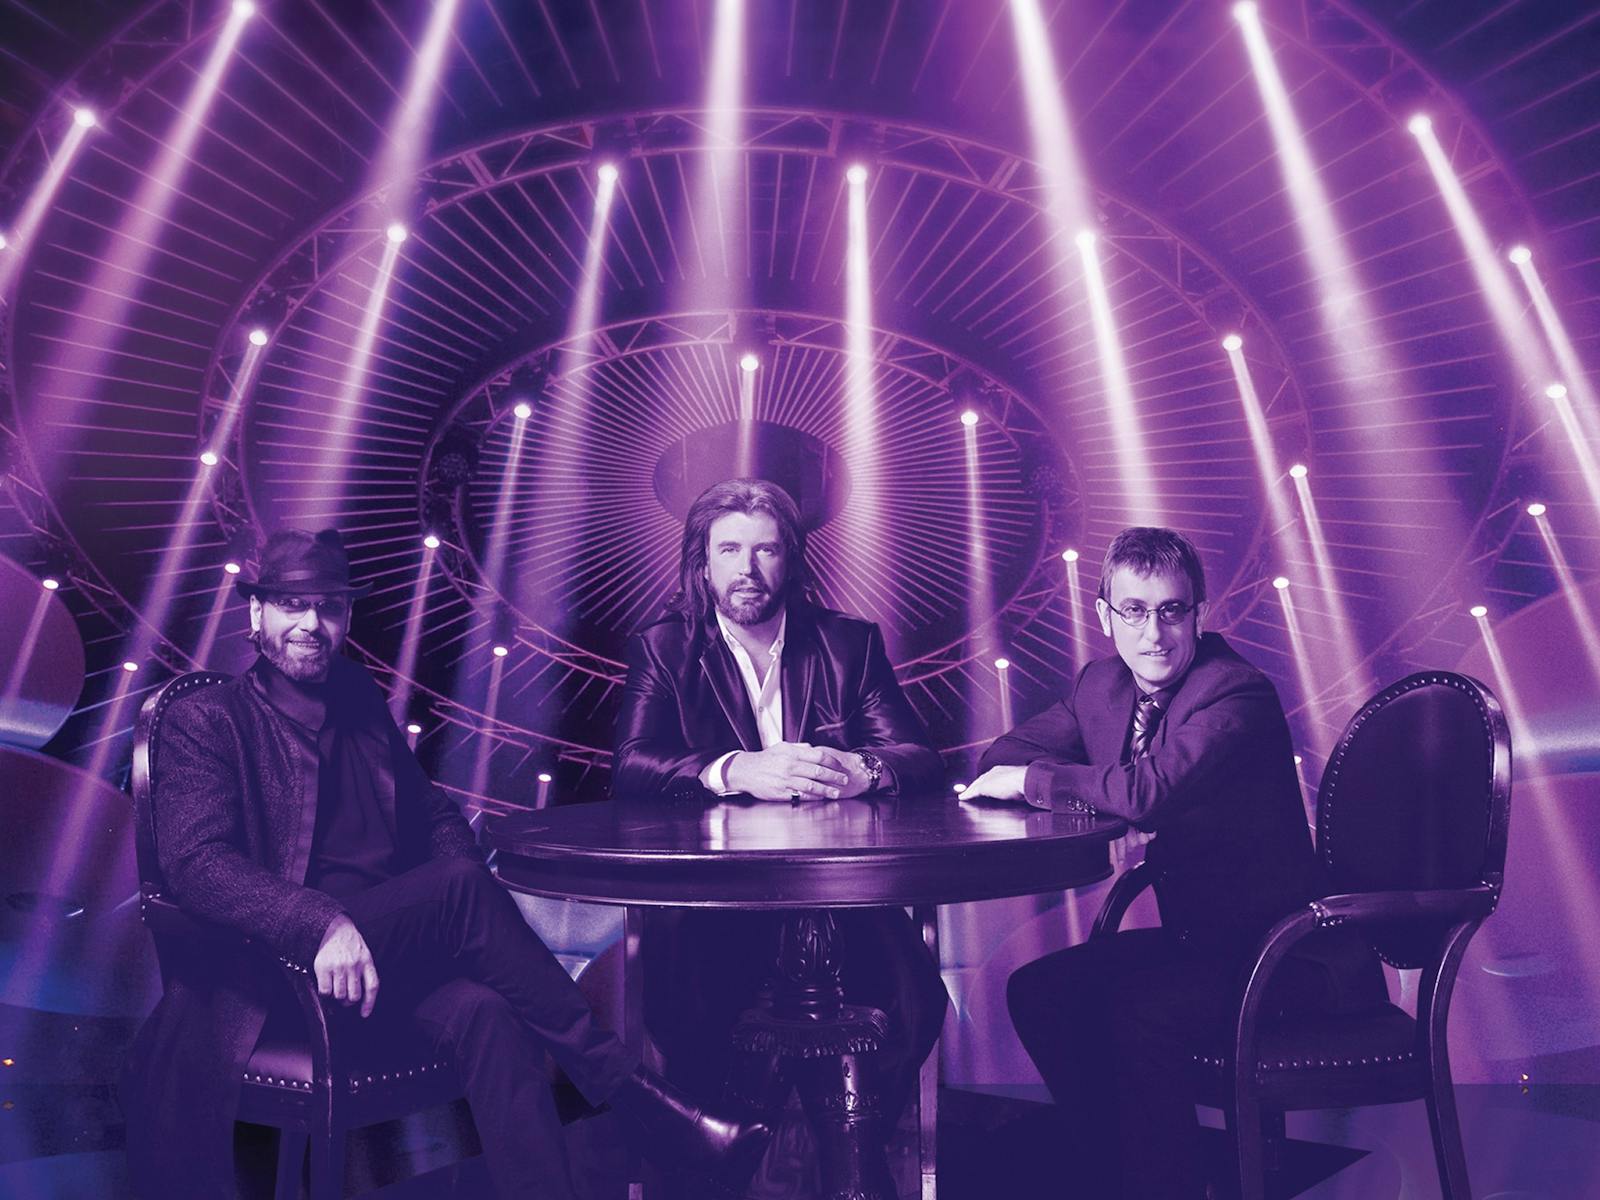 Image for The Australian Bee Gees Show - 25th Anniversary Tour - Thirroul